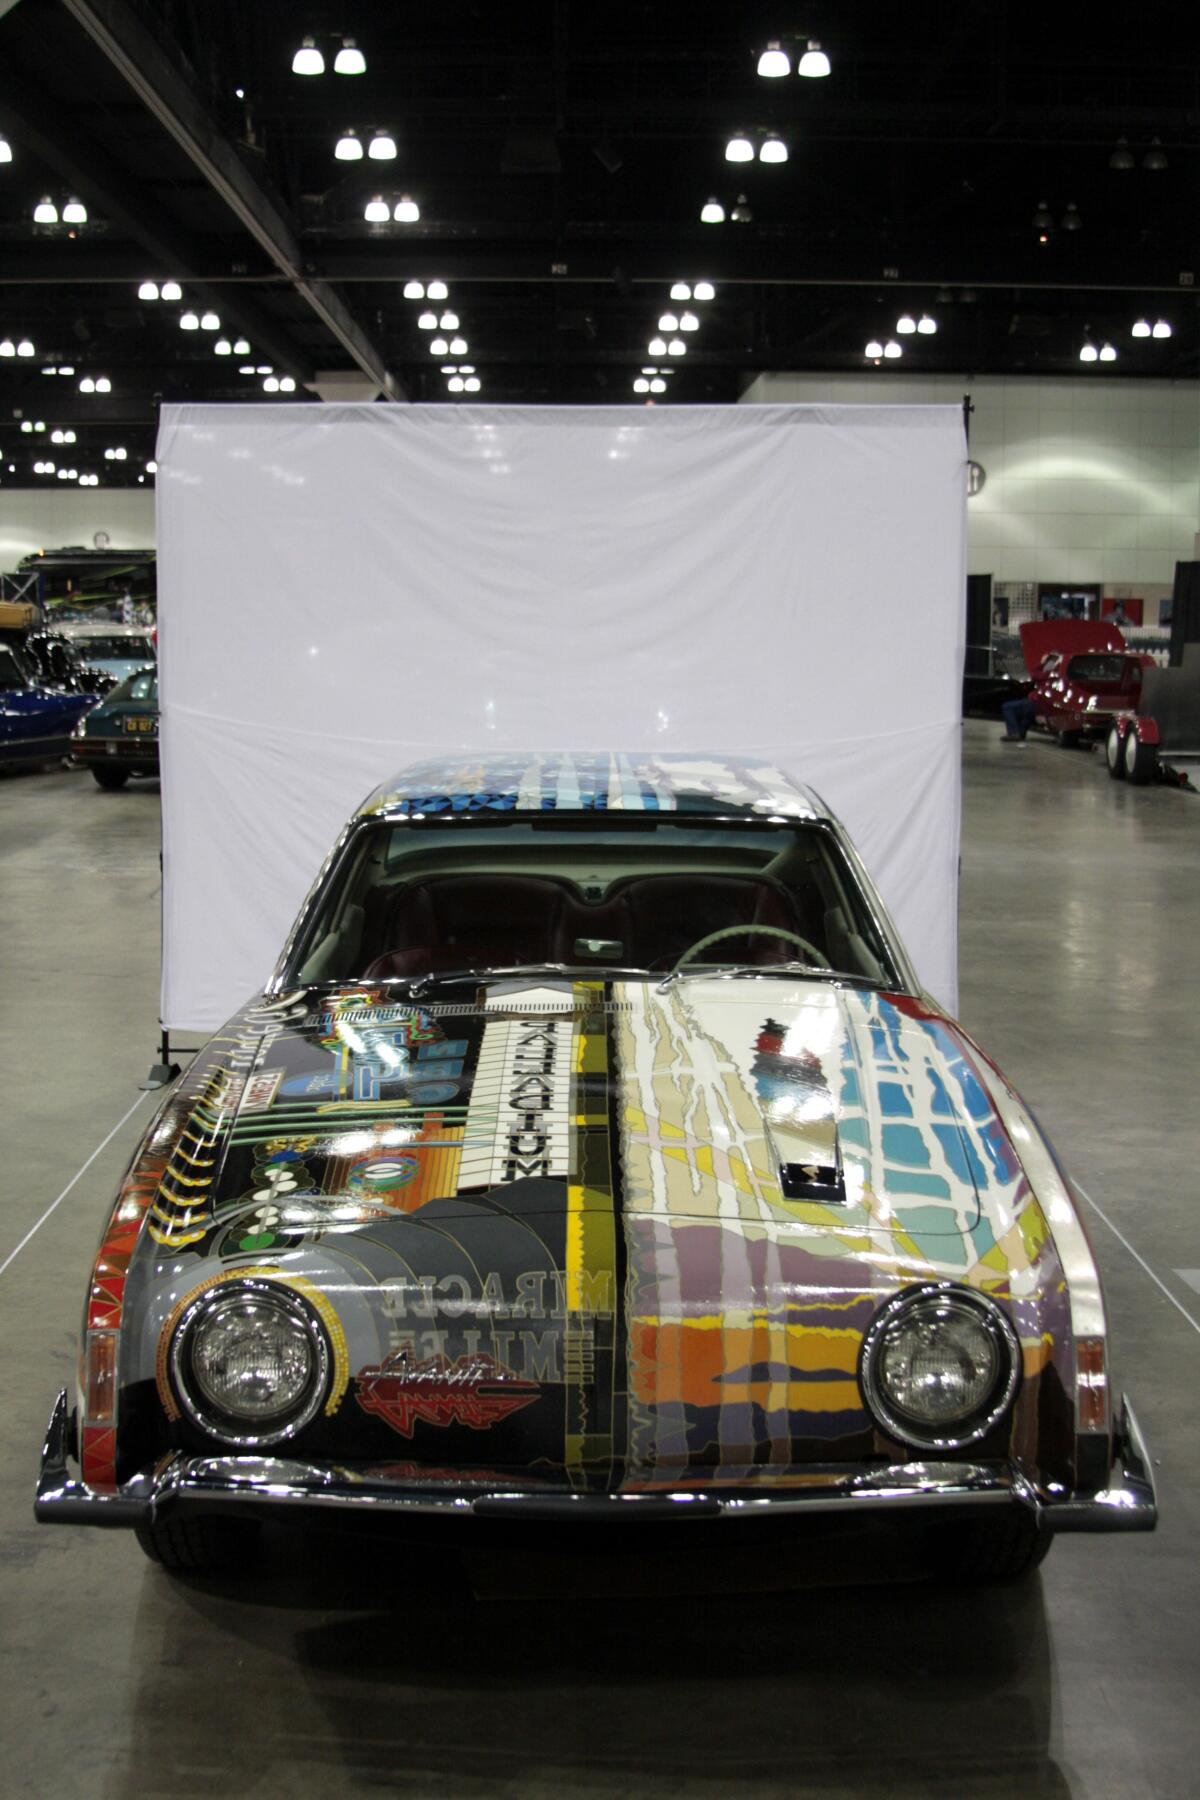 A front-view of "Tribute" displayed at the L.A. Classic Auto Show.